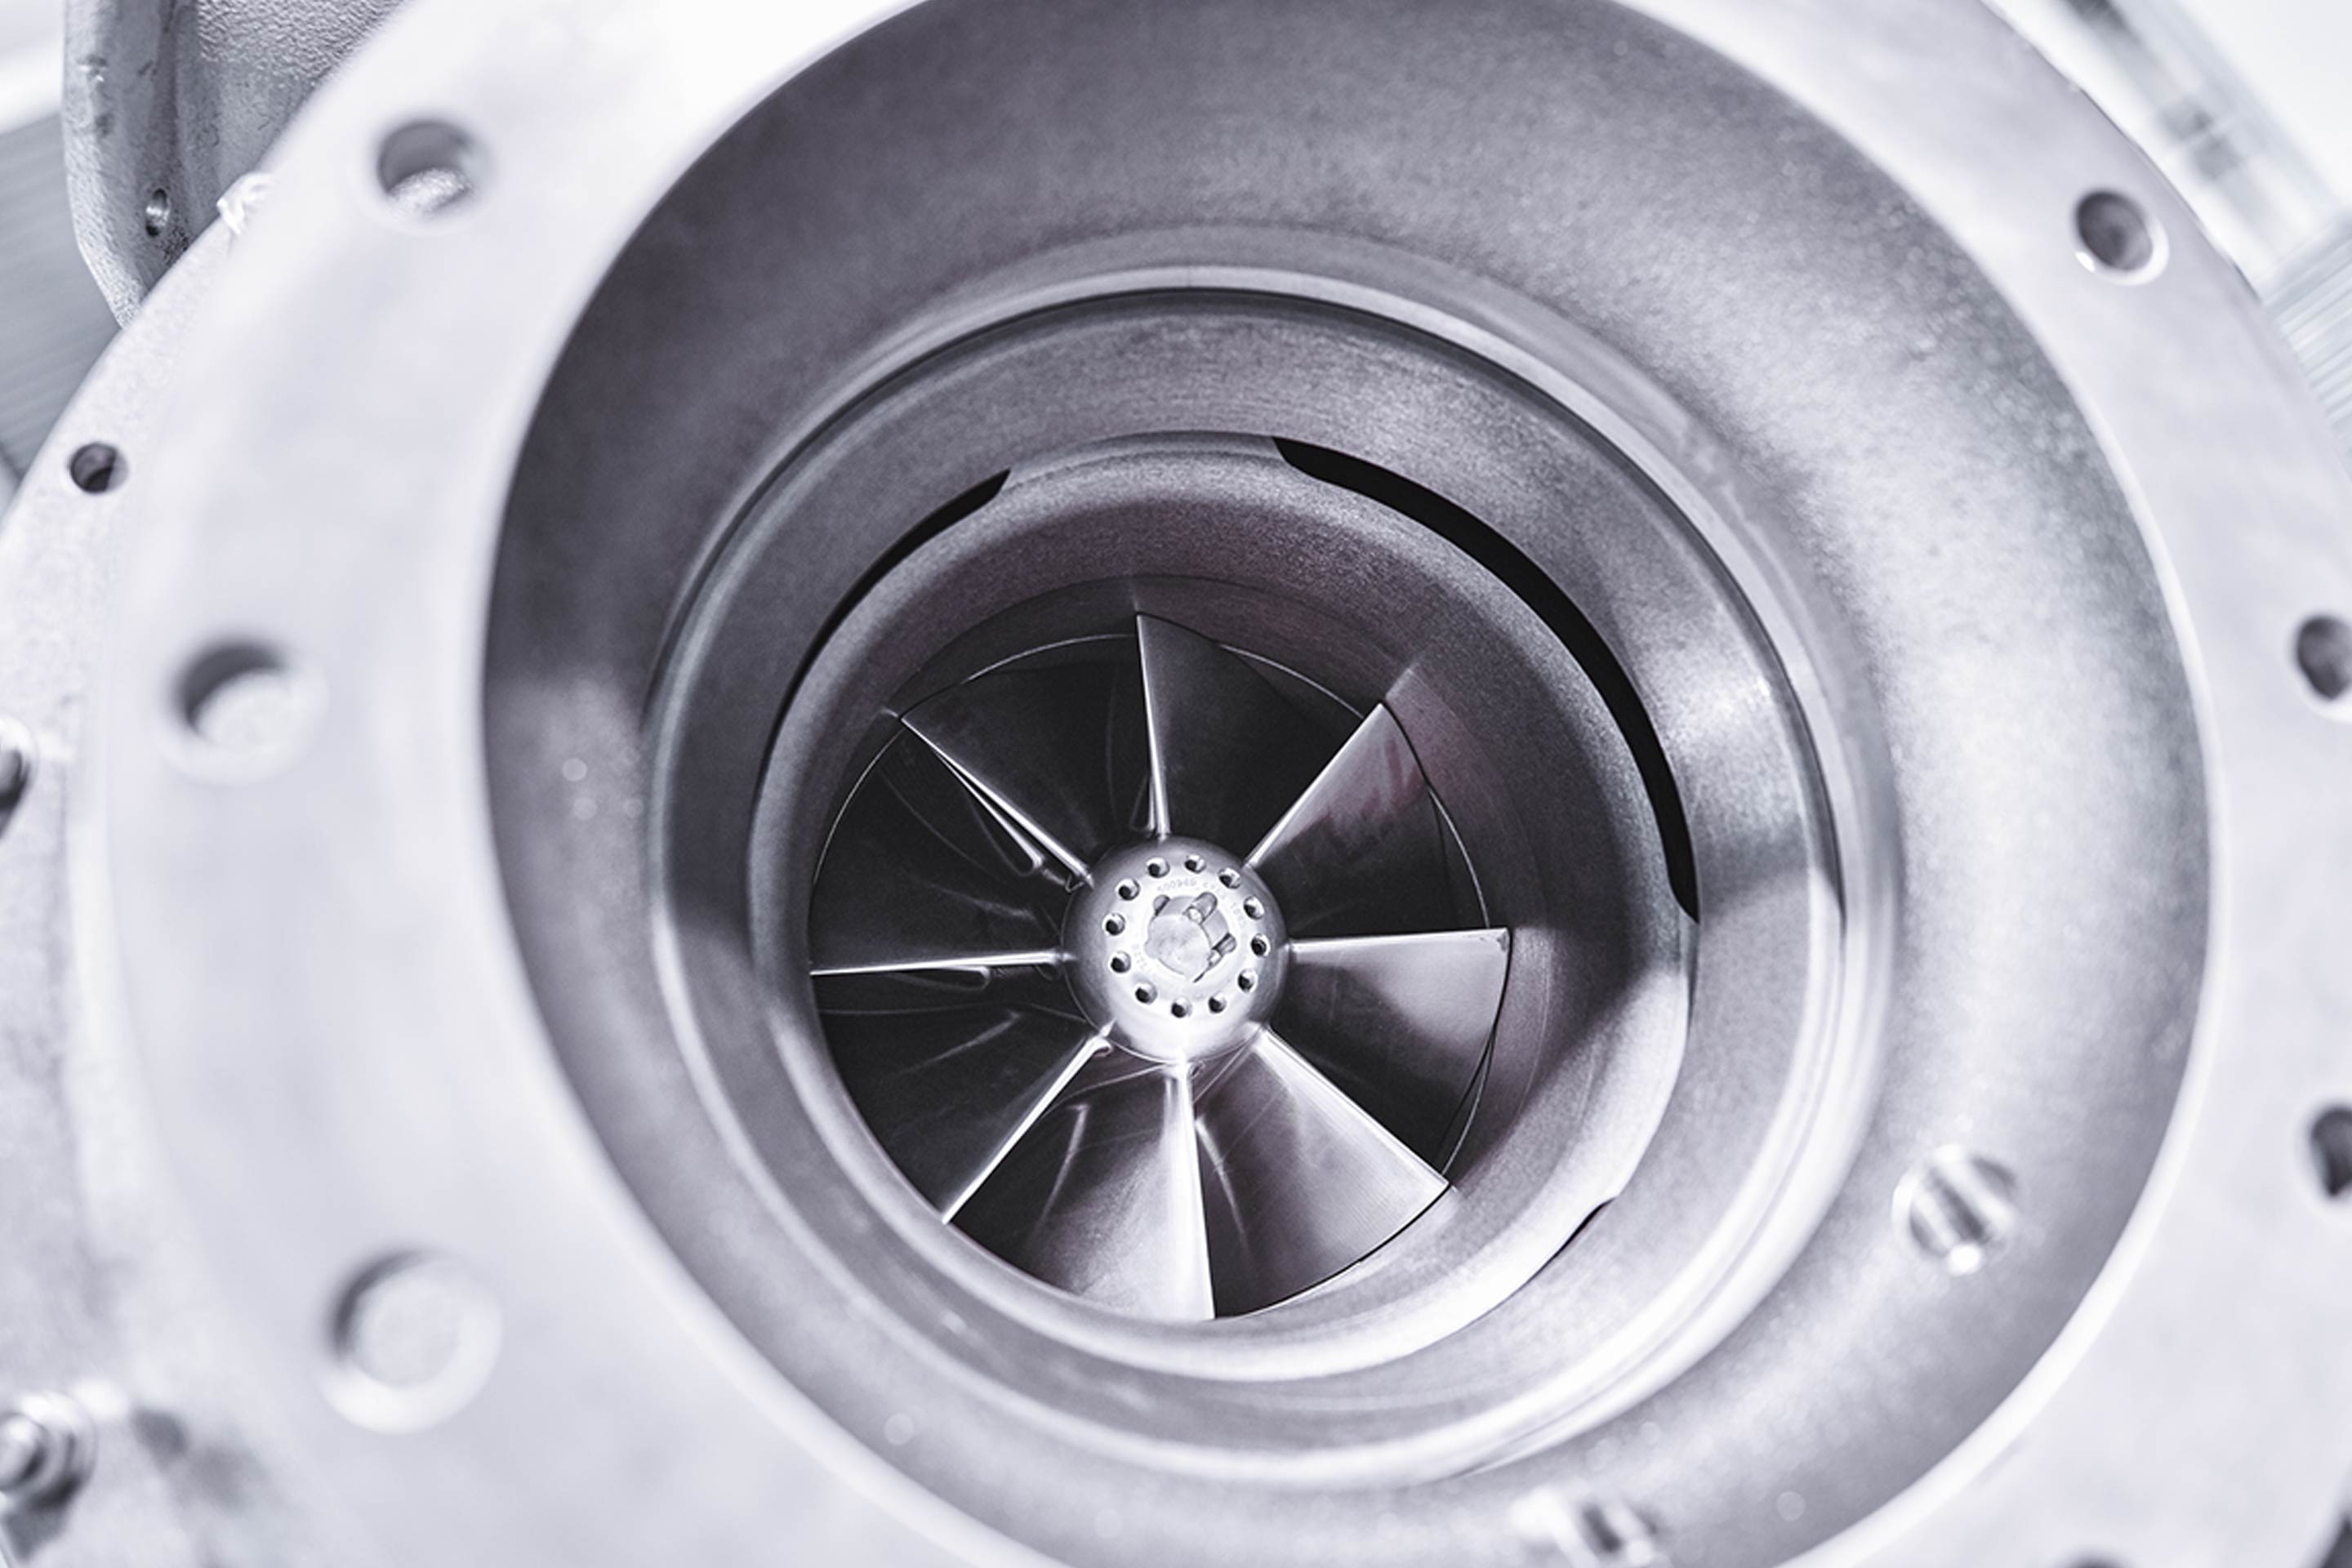 An image of an Accelleron turbocharger, for an interview with Accelleron's CTO Dirk Bergmann